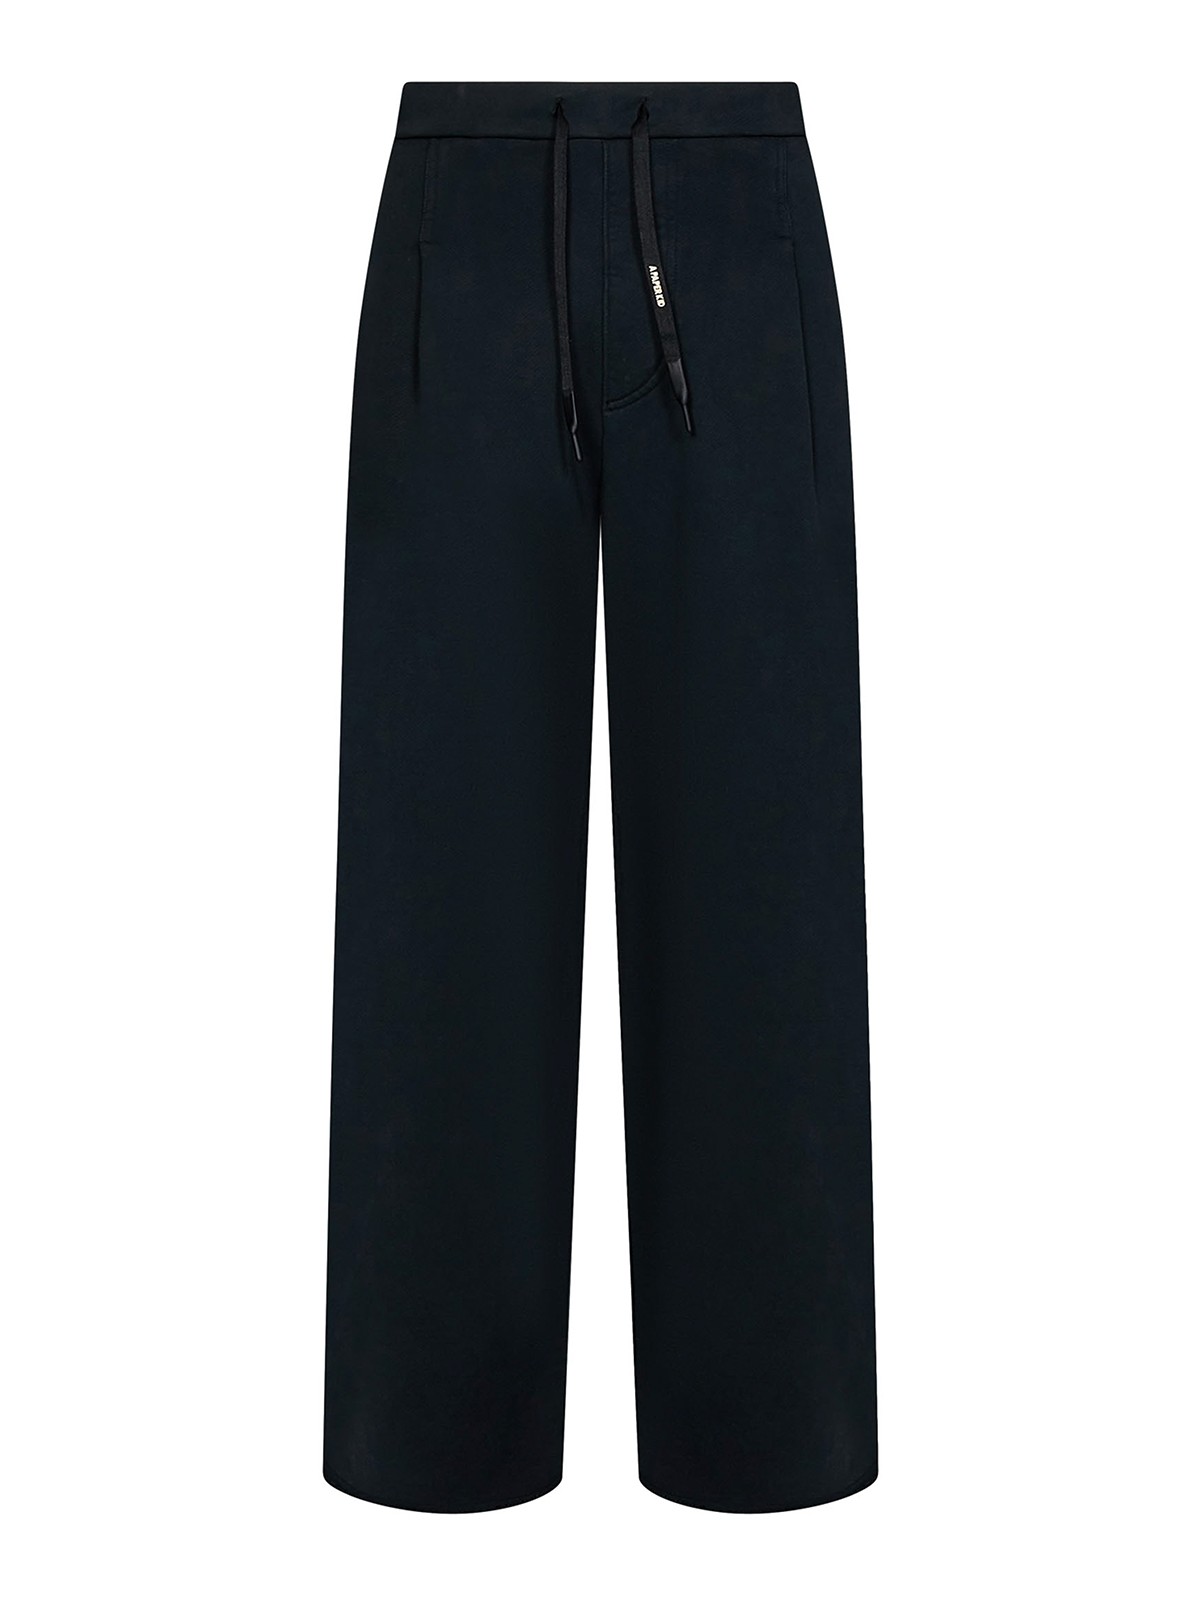 A Paper Kid Cotton French Terry Sweatpants In Black